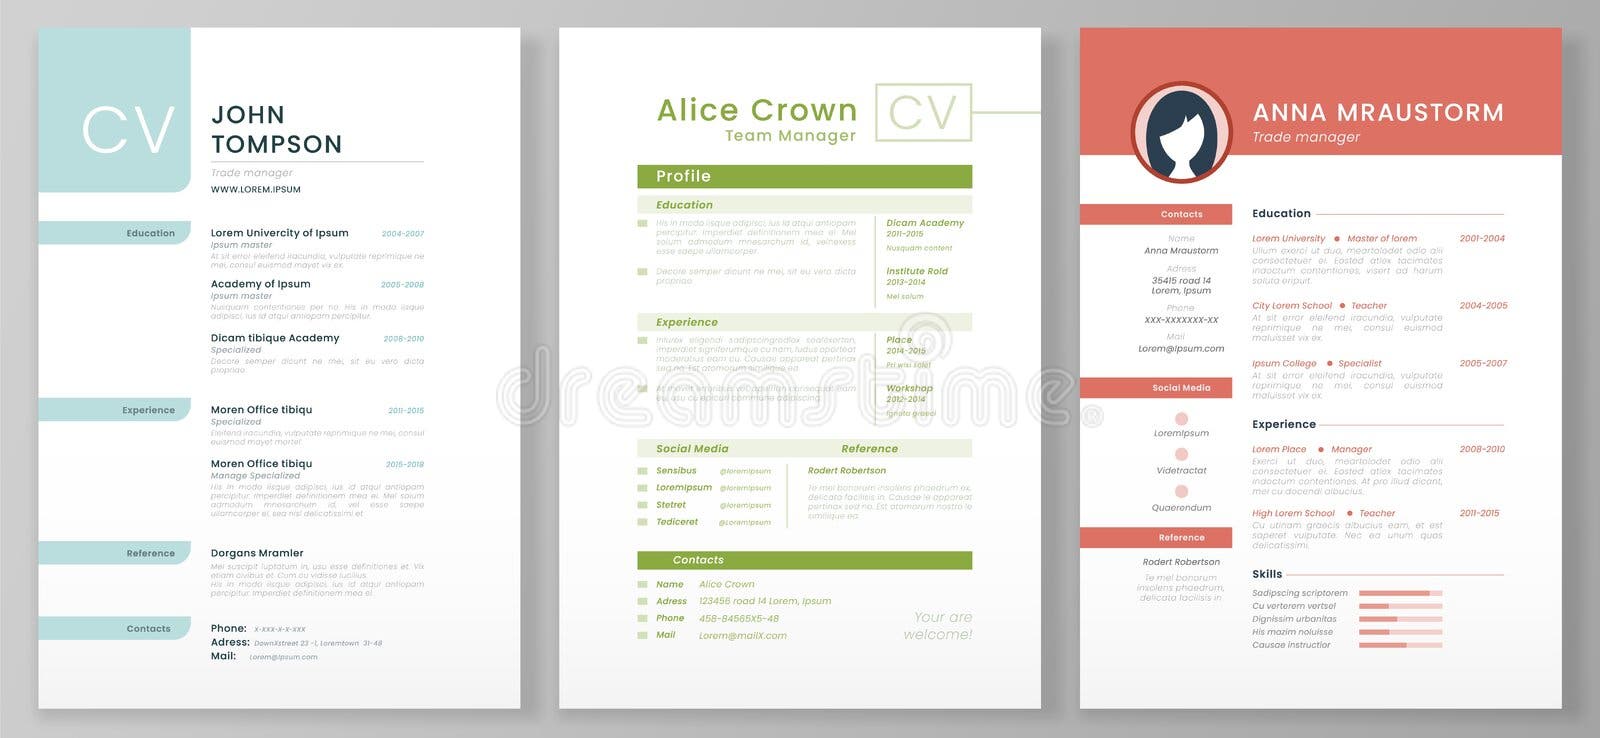 Apply Resume Cliparts, Stock Vector and Royalty Free Apply Resume  Illustrations